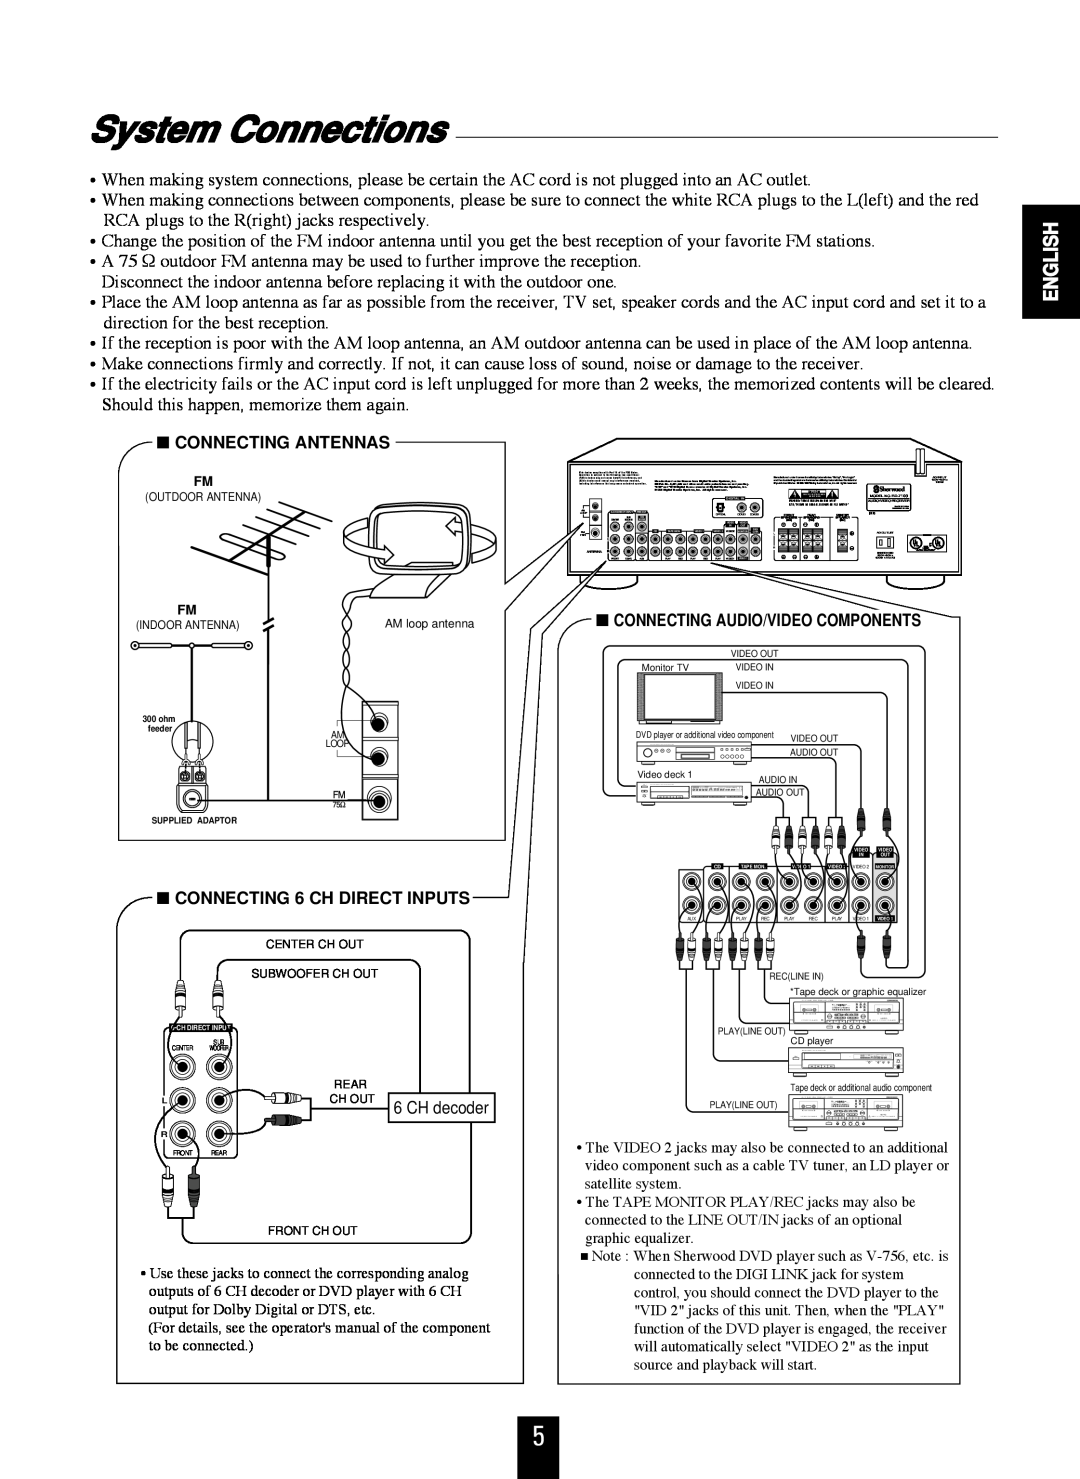 Sherwood RD-7103 manual System Connections, English, Connecting Antennas, CONNECTING 6 CH DIRECT INPUTS 